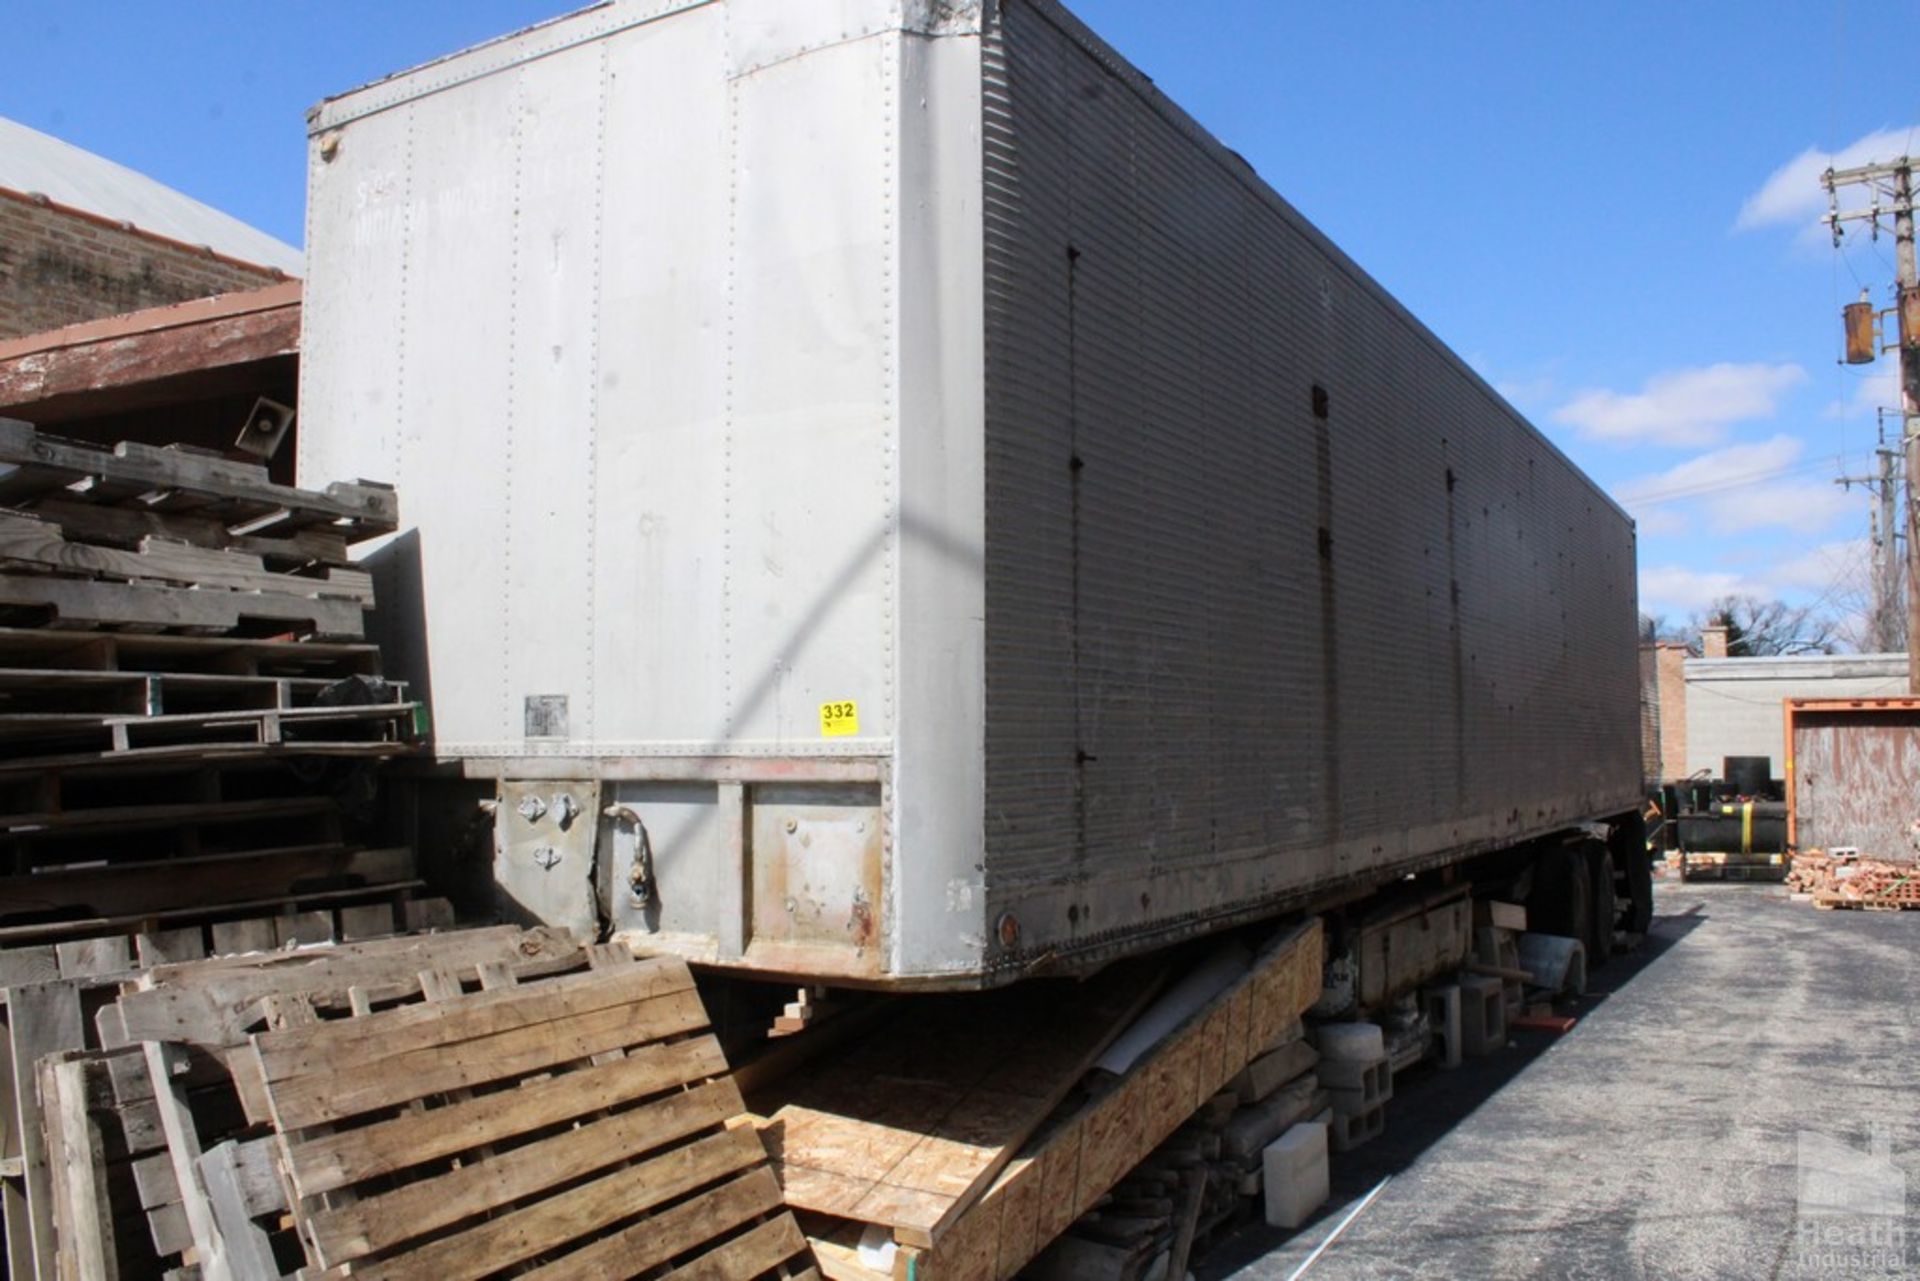 FRUEHAUF STORAGE TRAILER, APPROX. 38FT. LONG, NO TITLE AVAILABLE